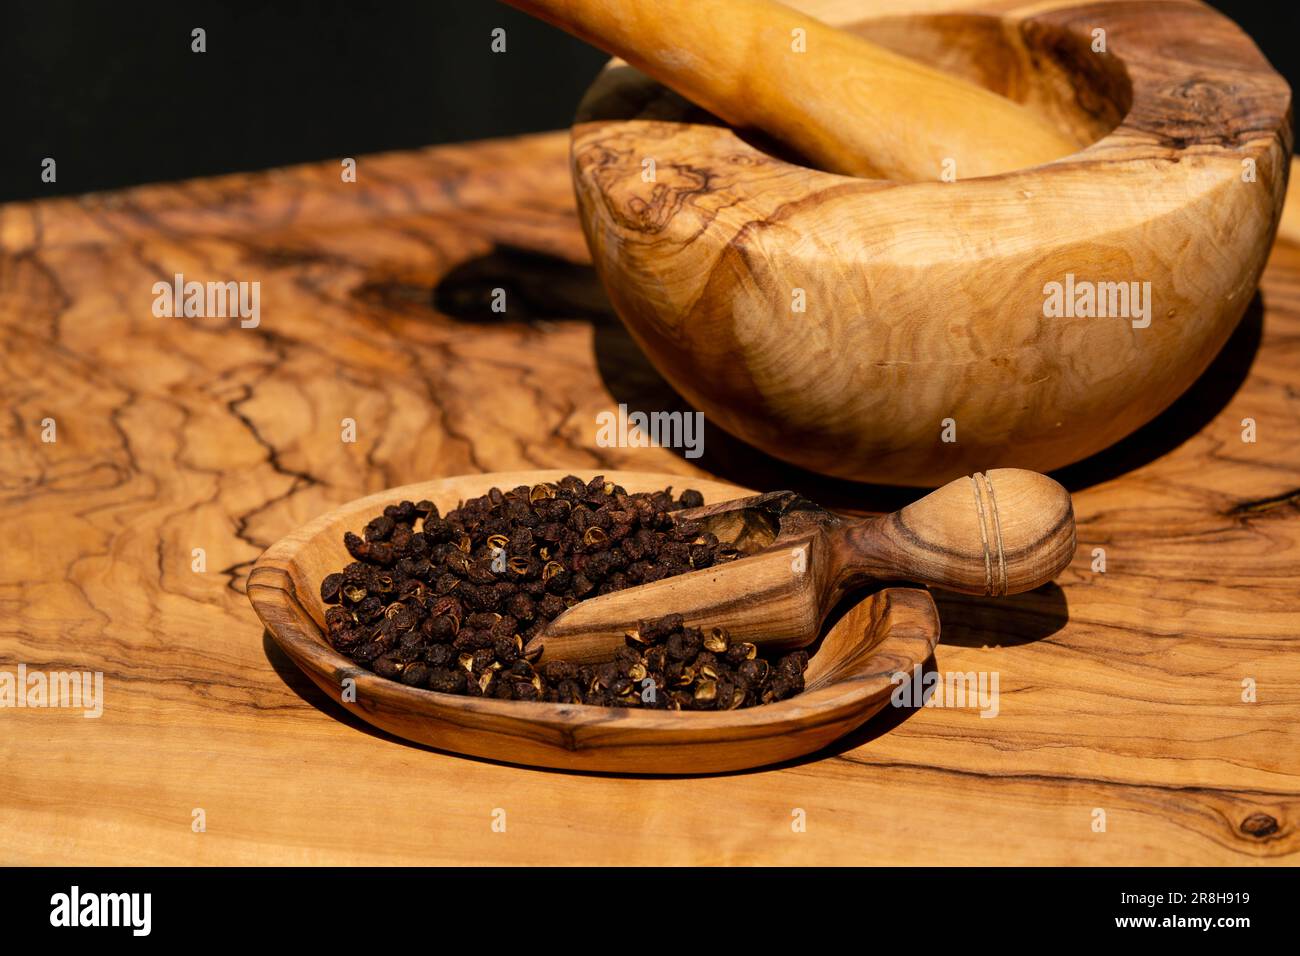 Chinese prickly ash or Sichuan pepper Zanthoxylum piperitum Stock Photo